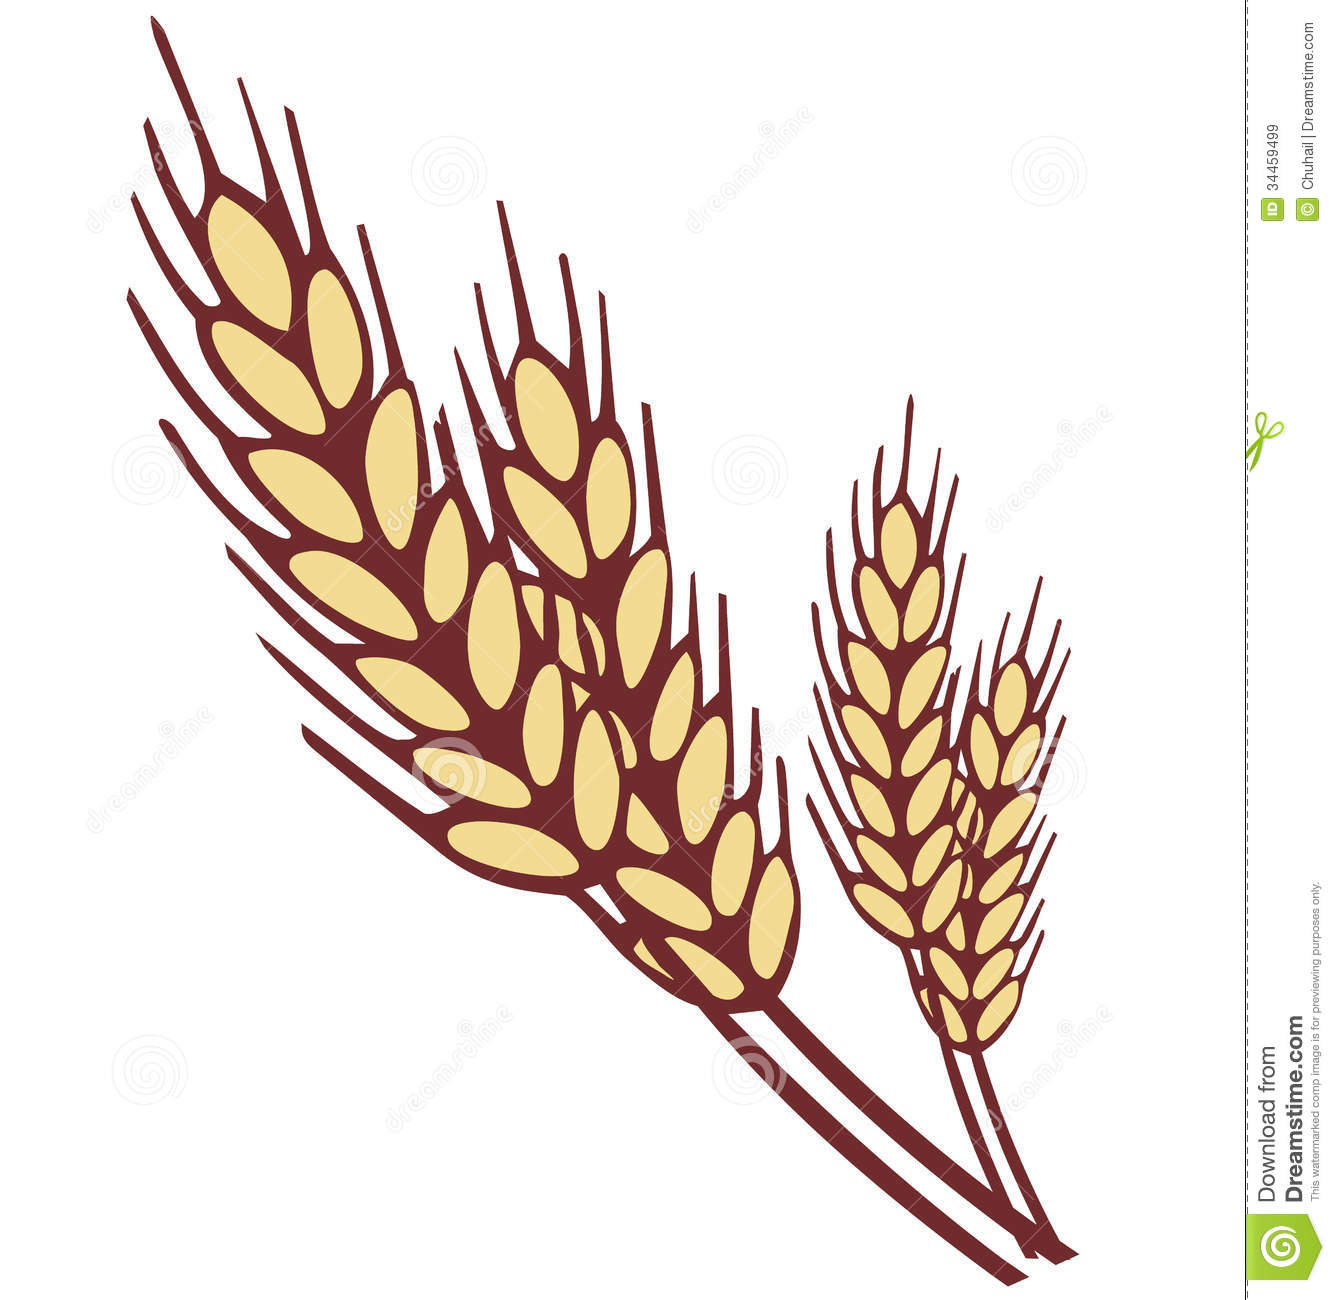 Wheat Ear Royalty Free Stock Images   Image  34459499